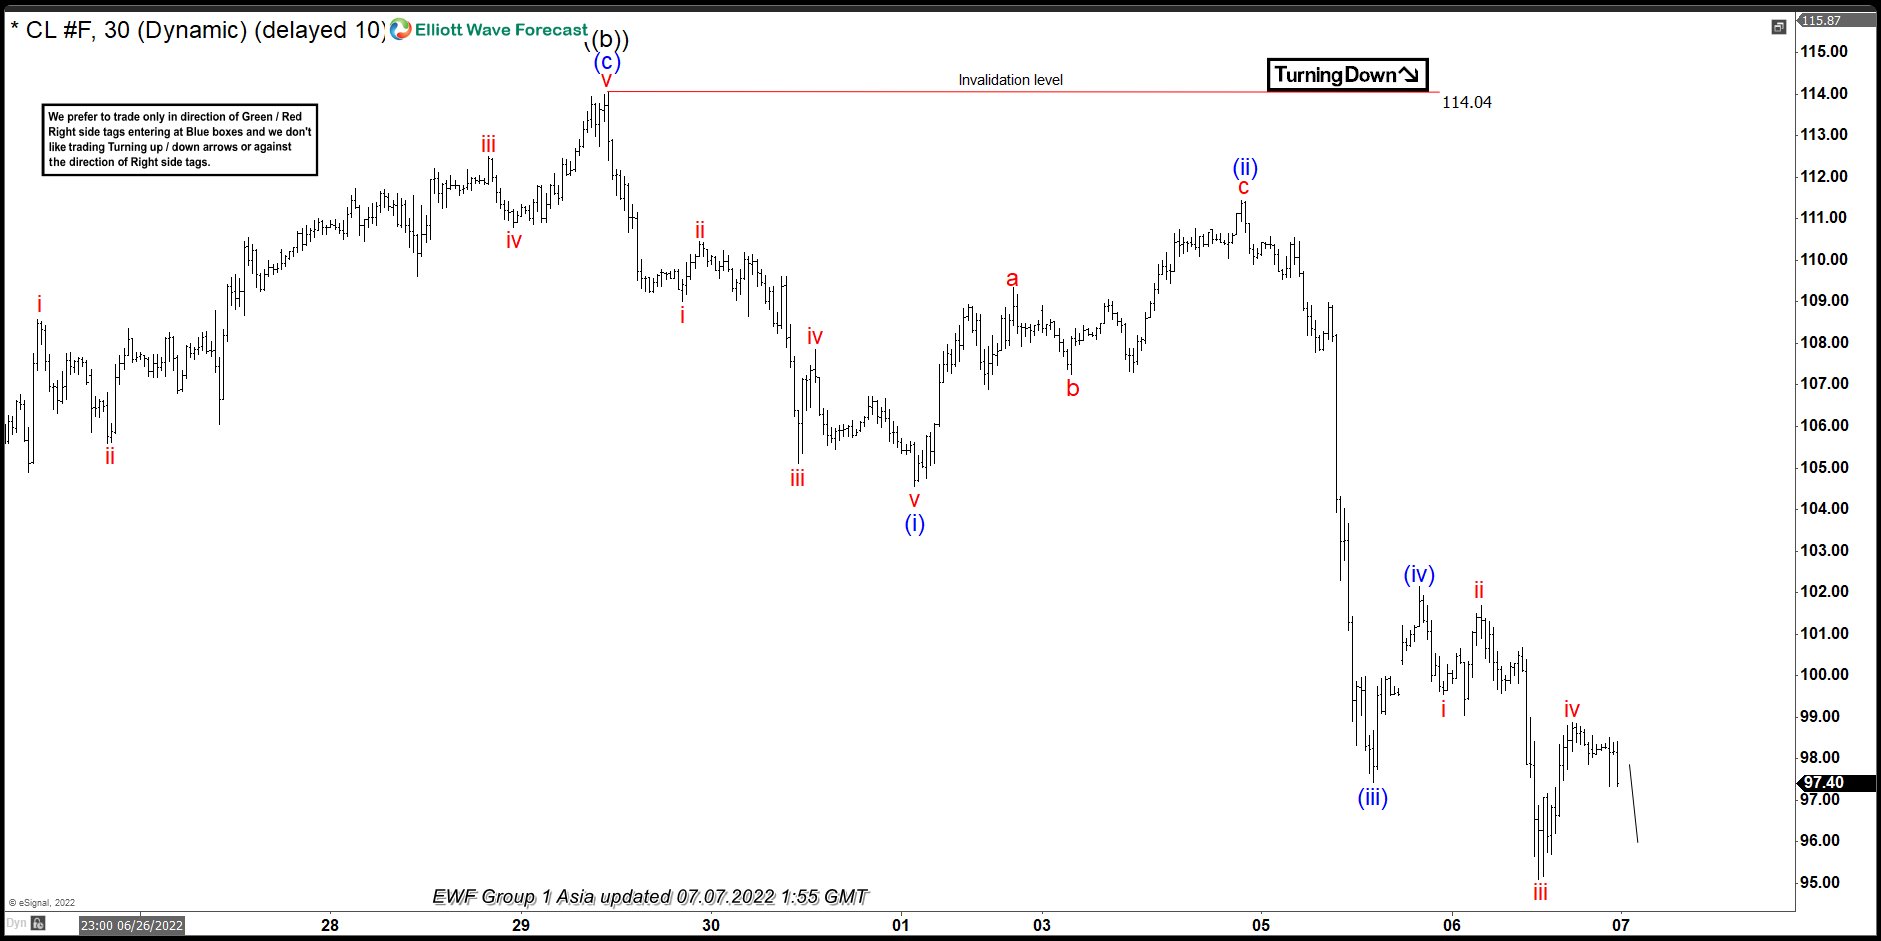 Elliott Wave View: Oil Near To Complete a Cycle Looking For A Bounce